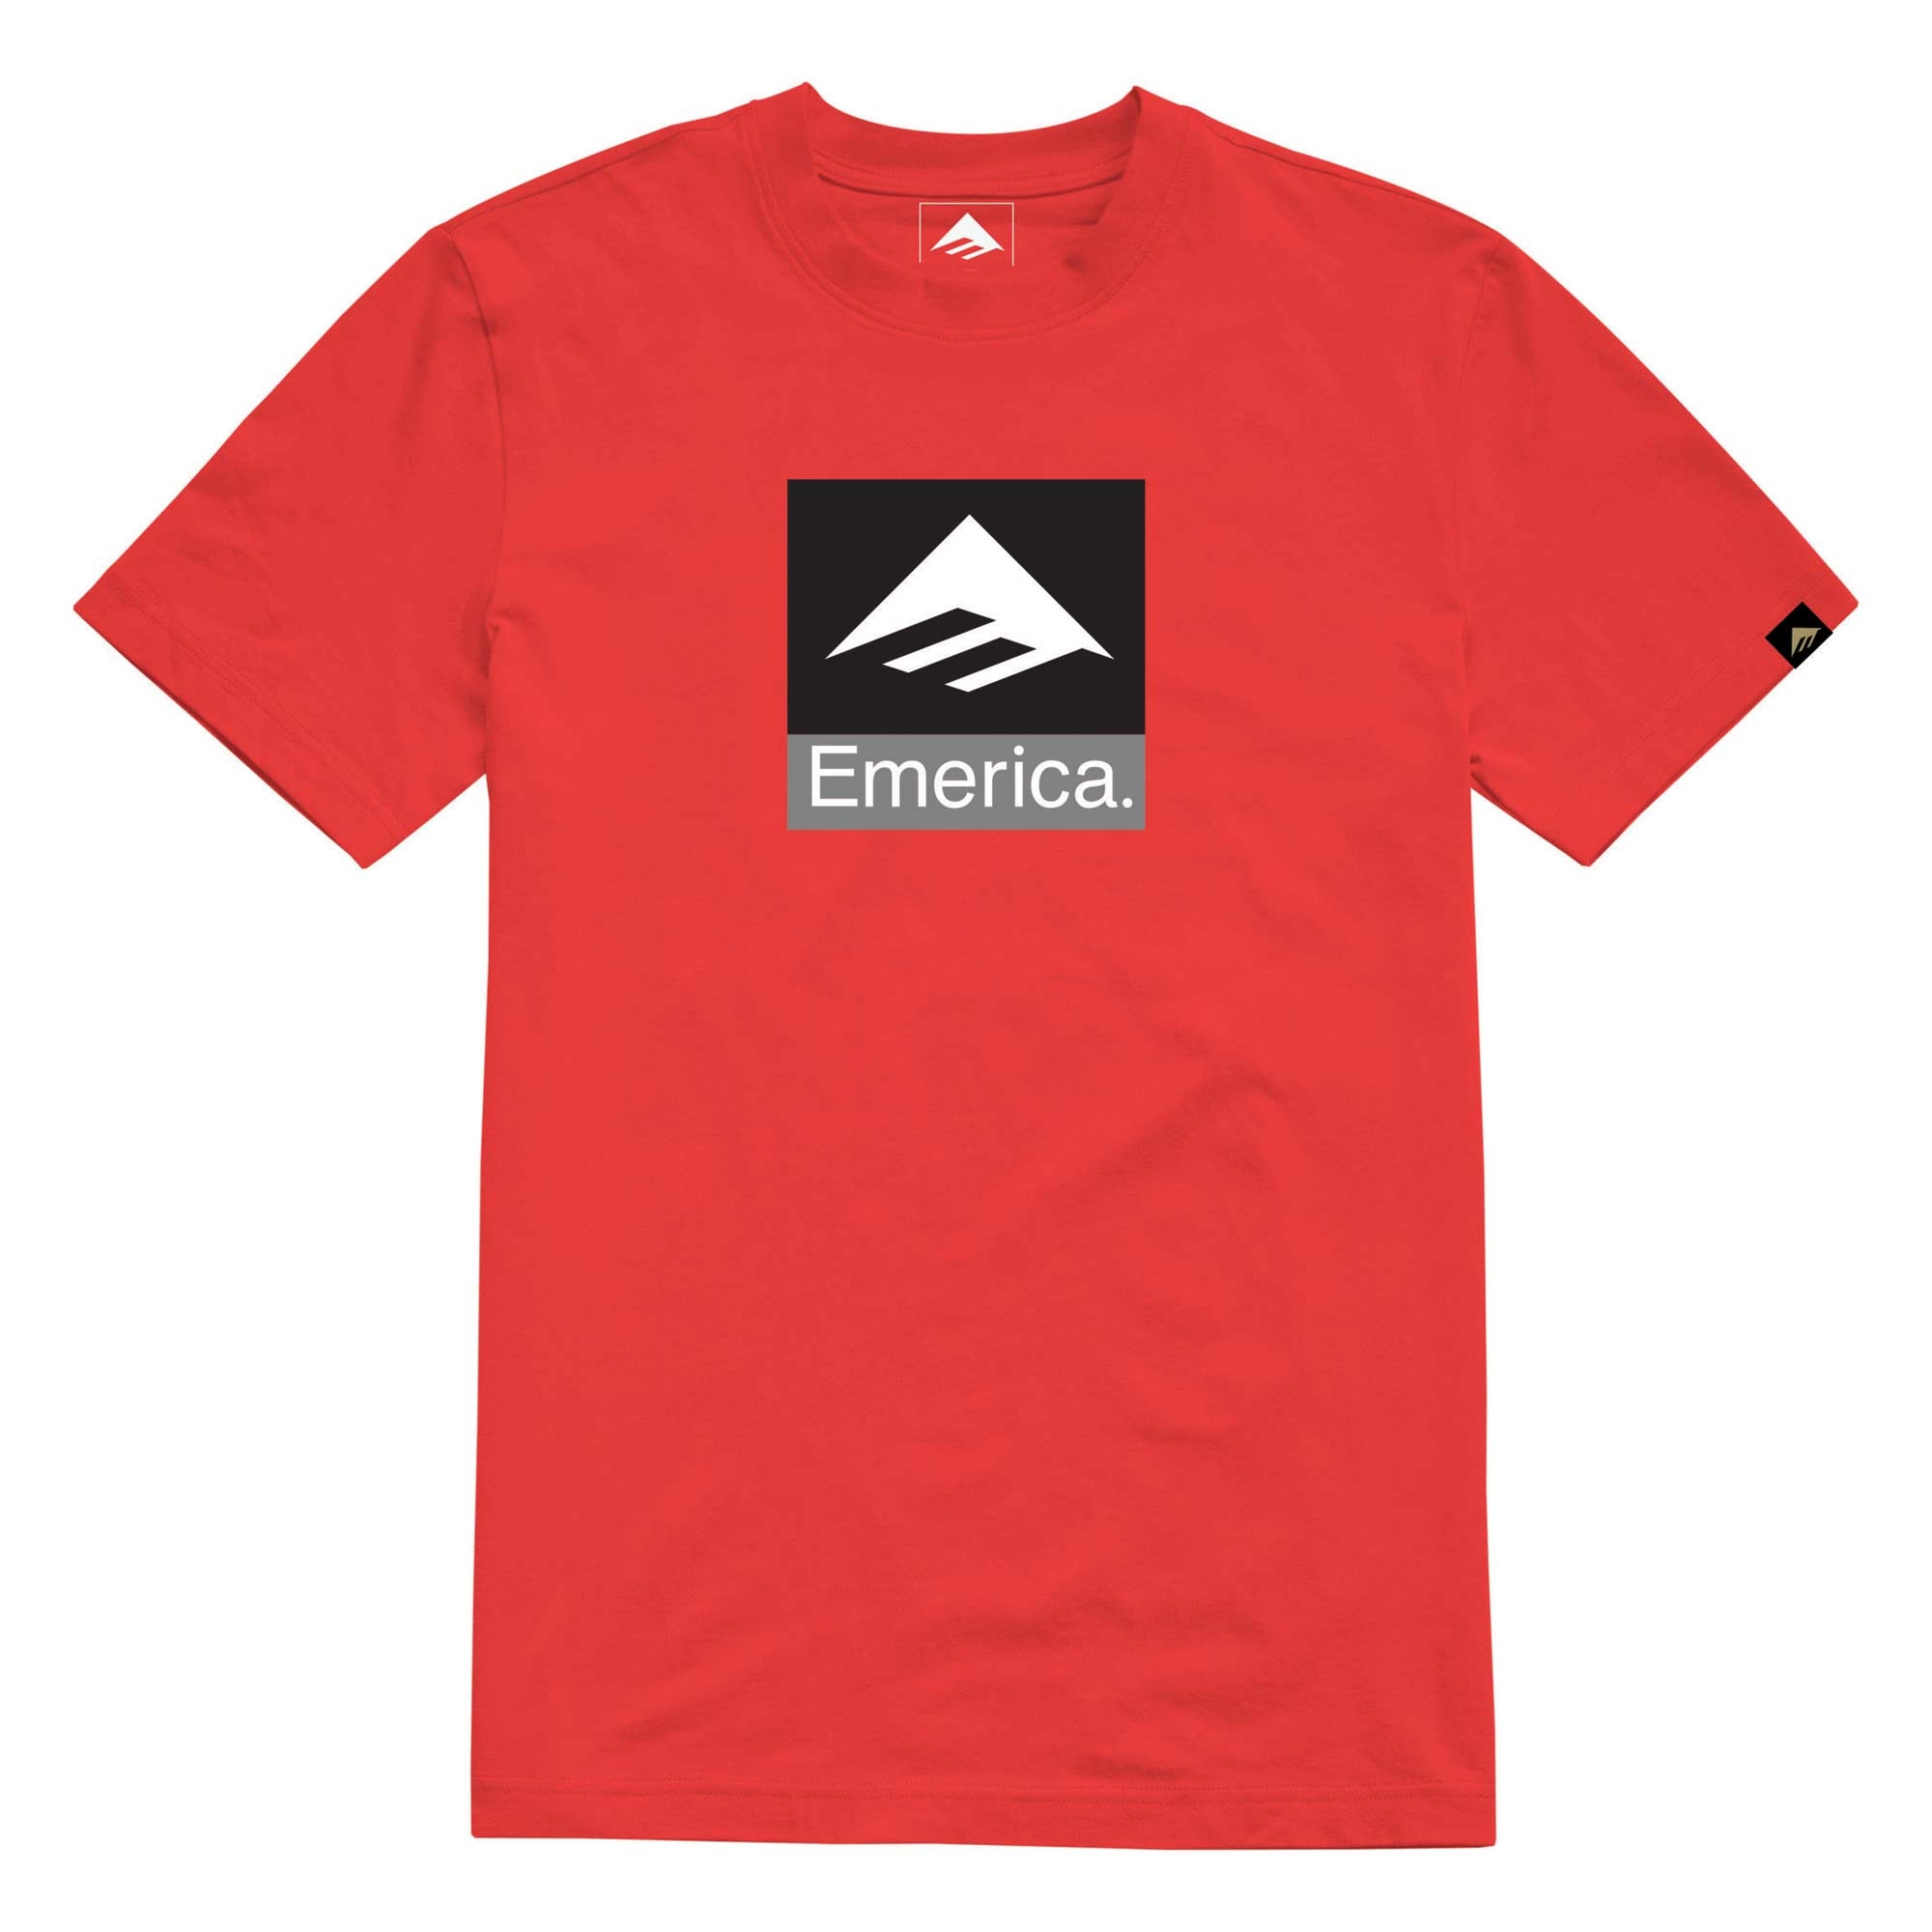 EMERICA Youth T-Shirt KIDS PURE (CLASSIC) COMBO red